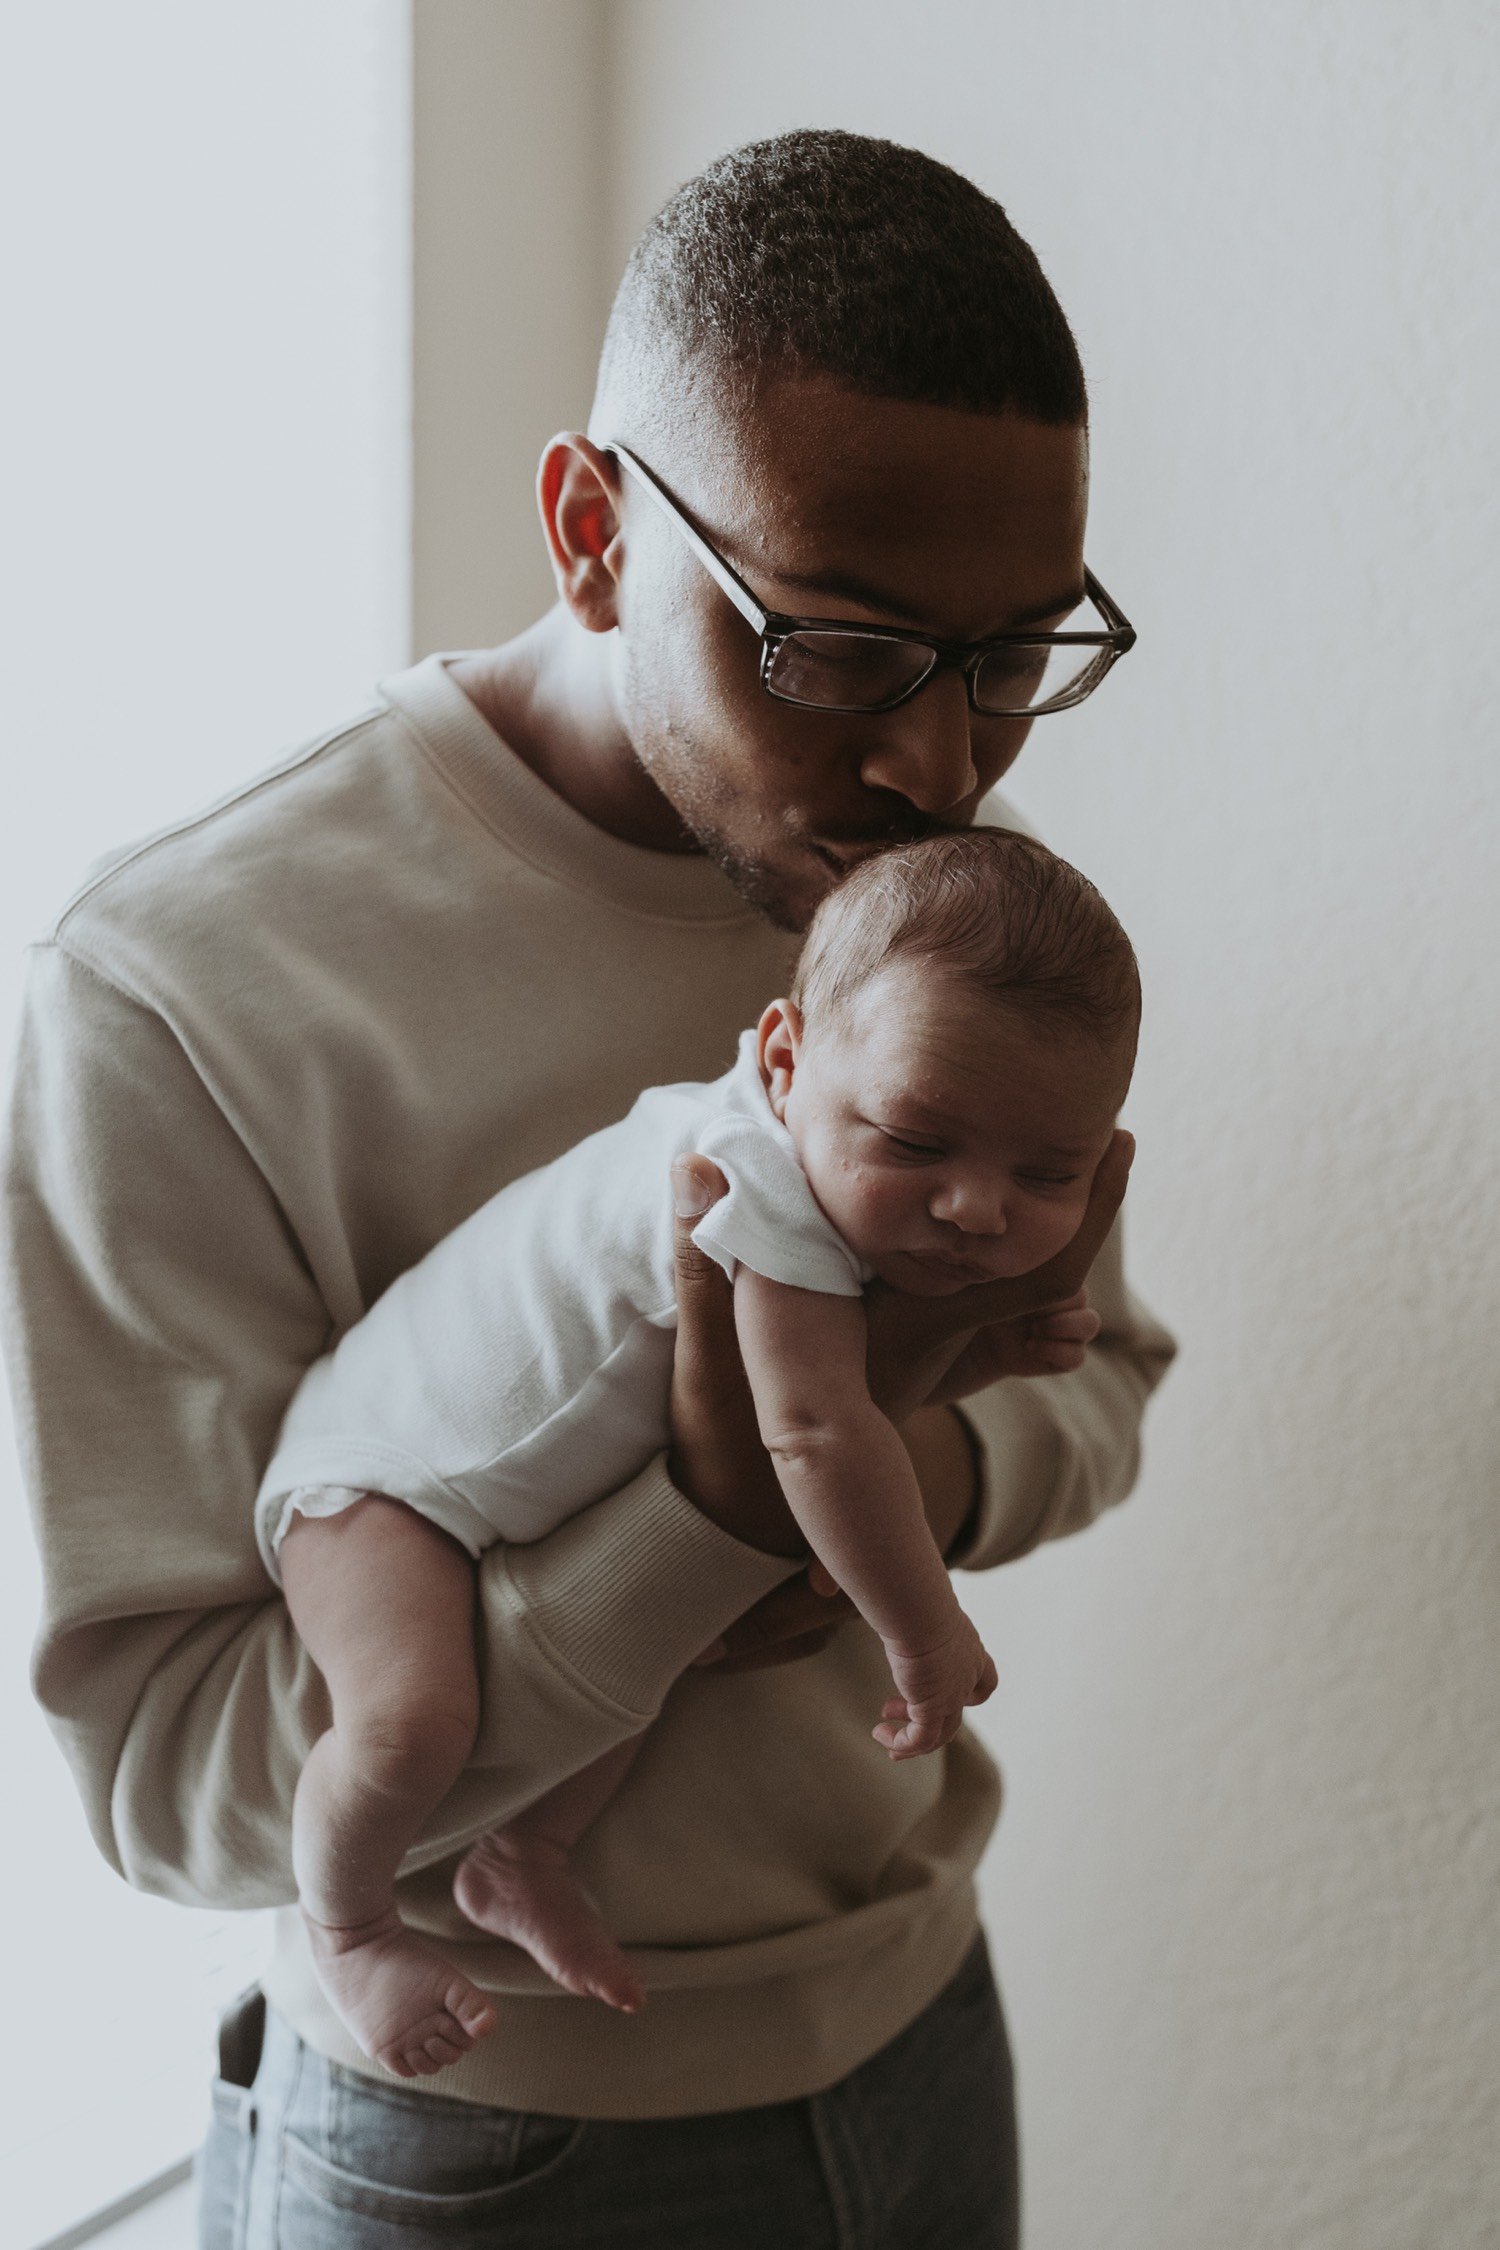 Newborn and Sibling Photo Ideas | Nadia Greaves Photography